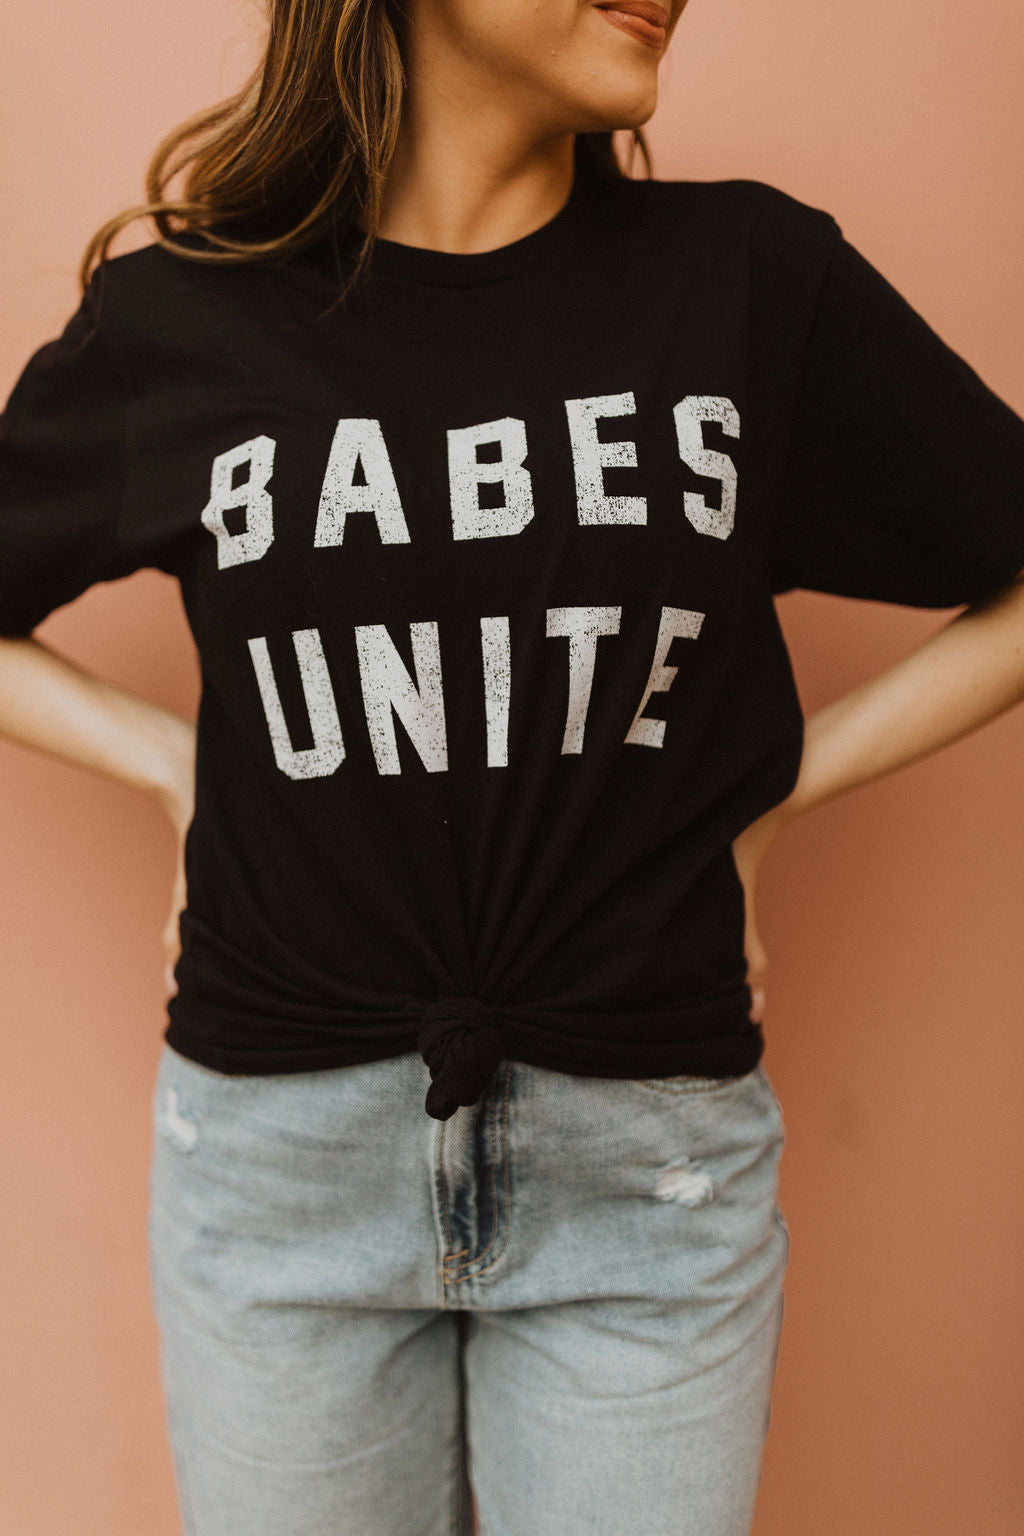 THE BABES UNITE GRAPHIC TEE IN BLACK